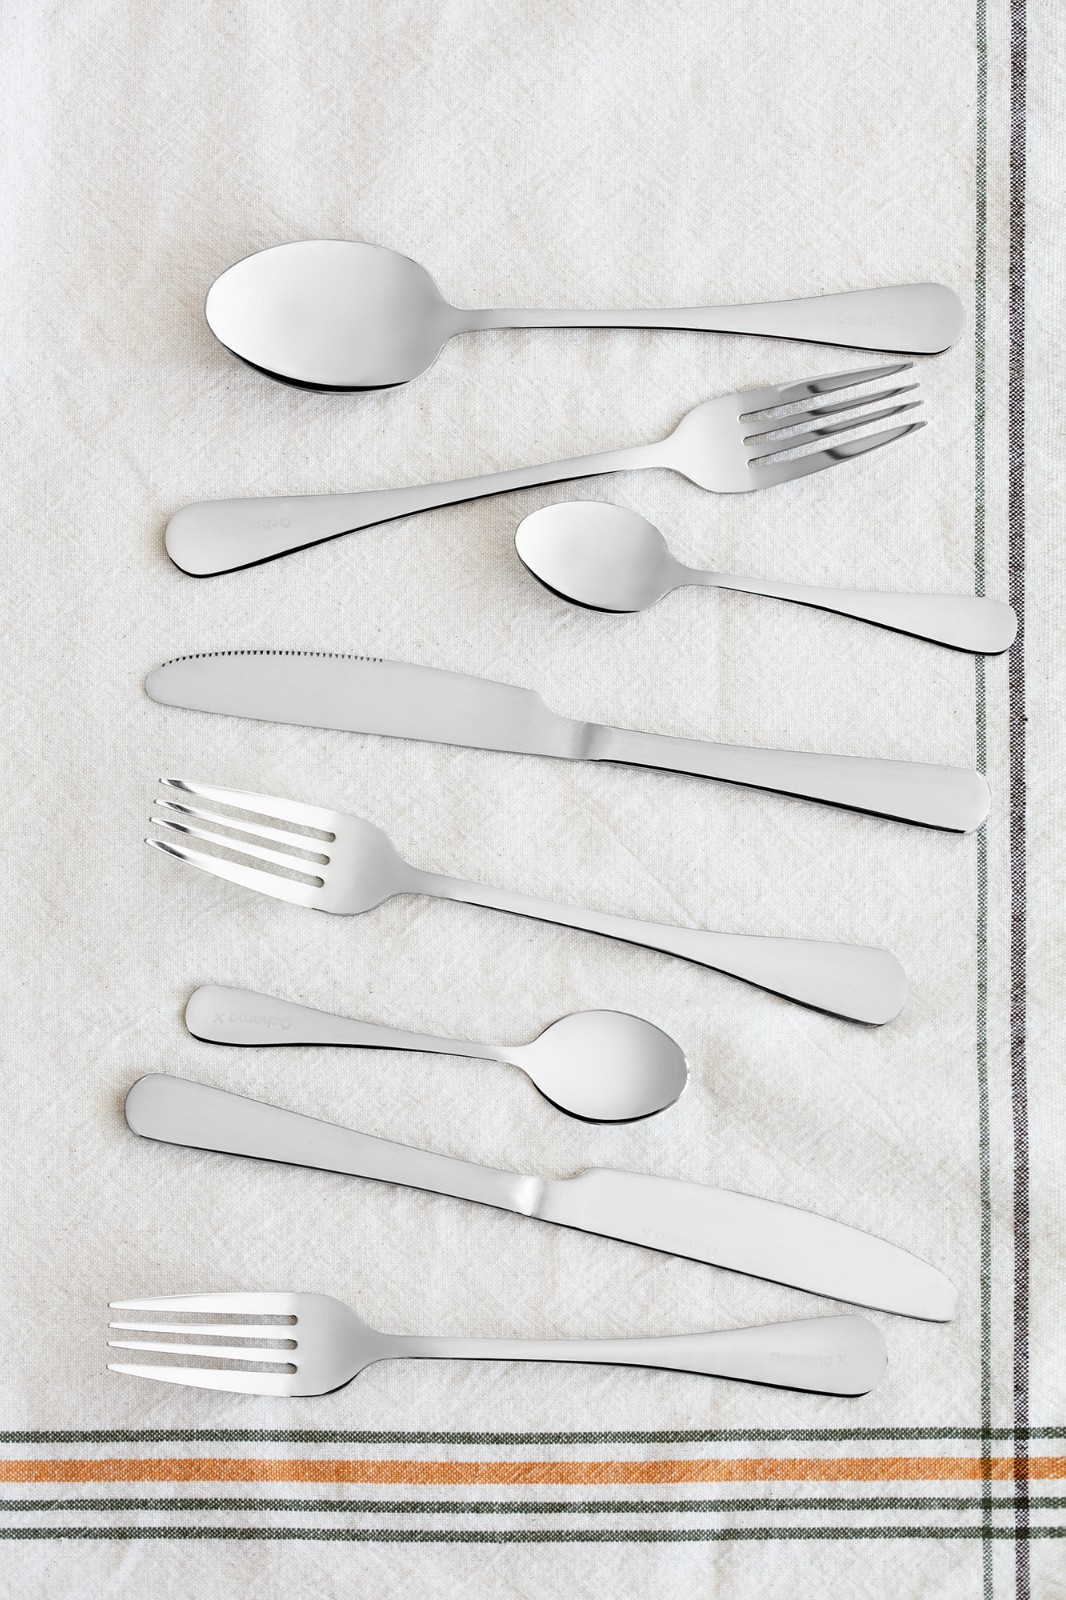 Cutlery Set for 6 Persons 24pcs